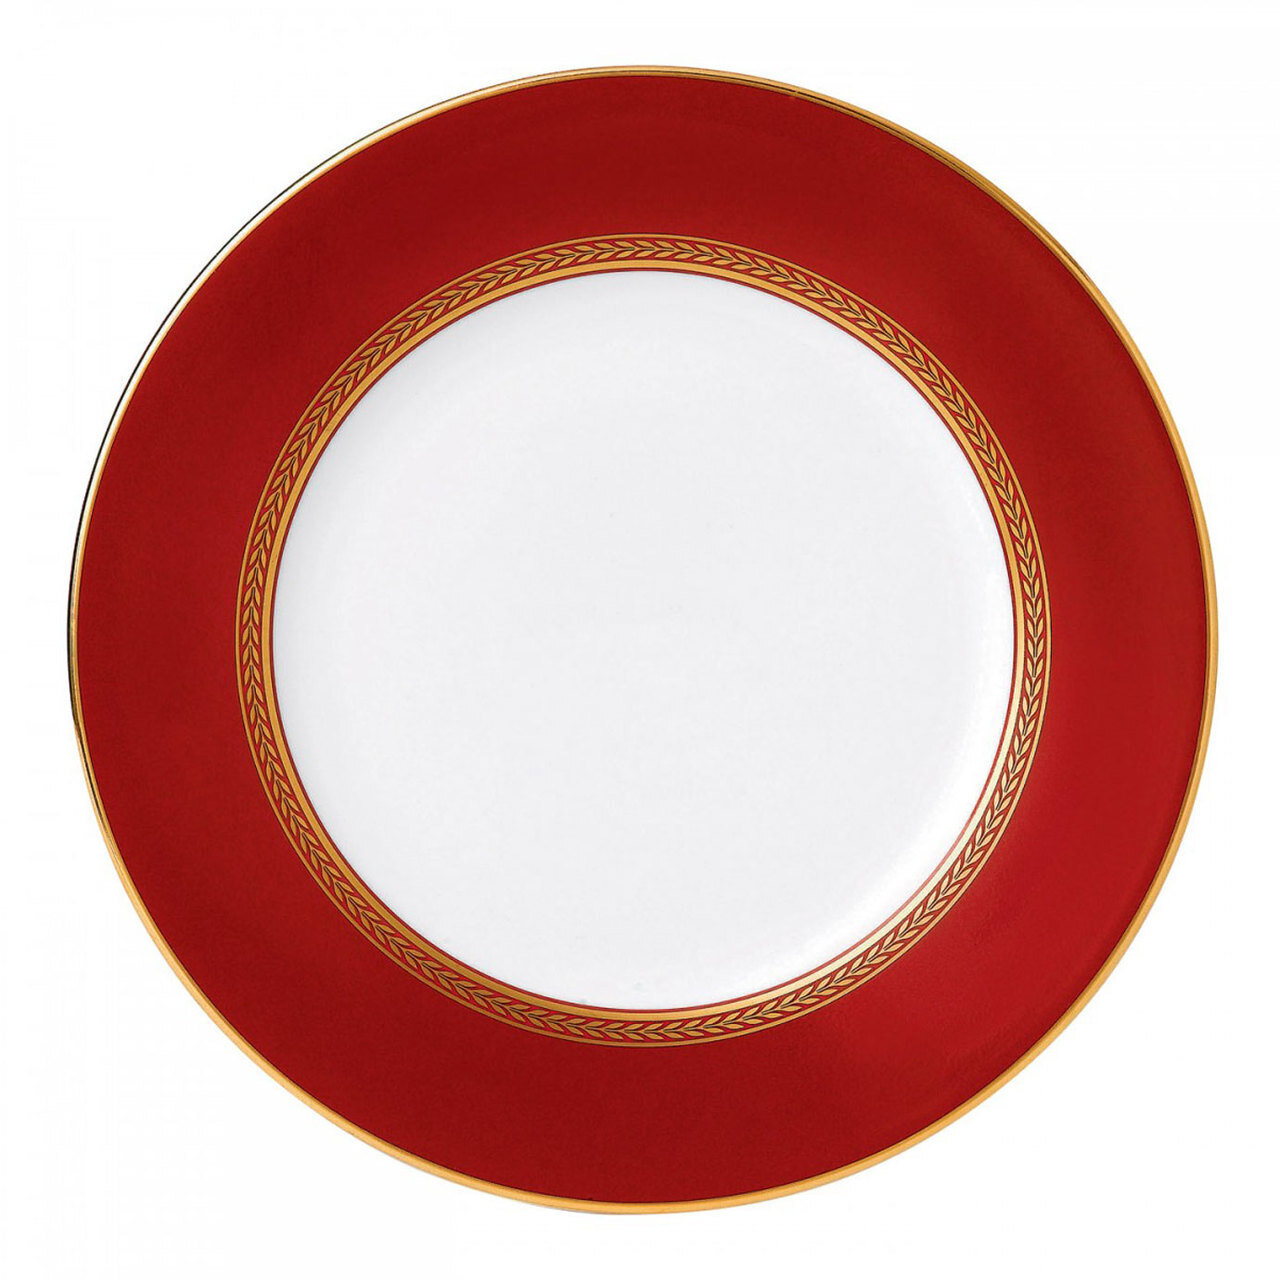 Wedgwood Renaissance Red Salad Plate 8 Inch